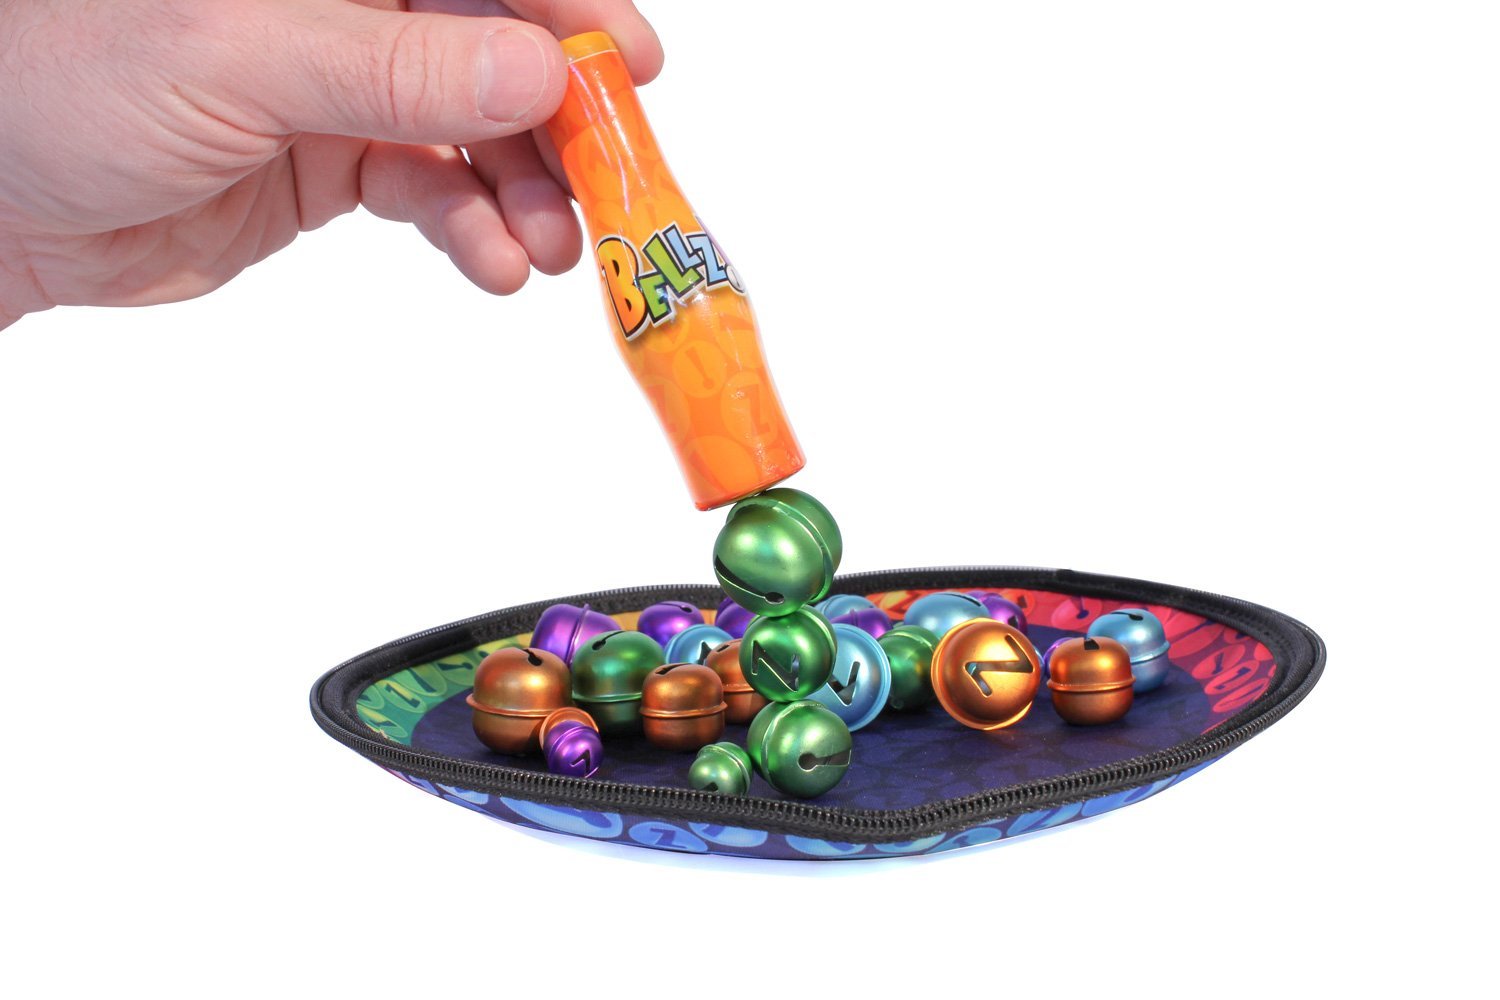 Bellz! A Positively Magnetic Game Only $10 on Amazon!